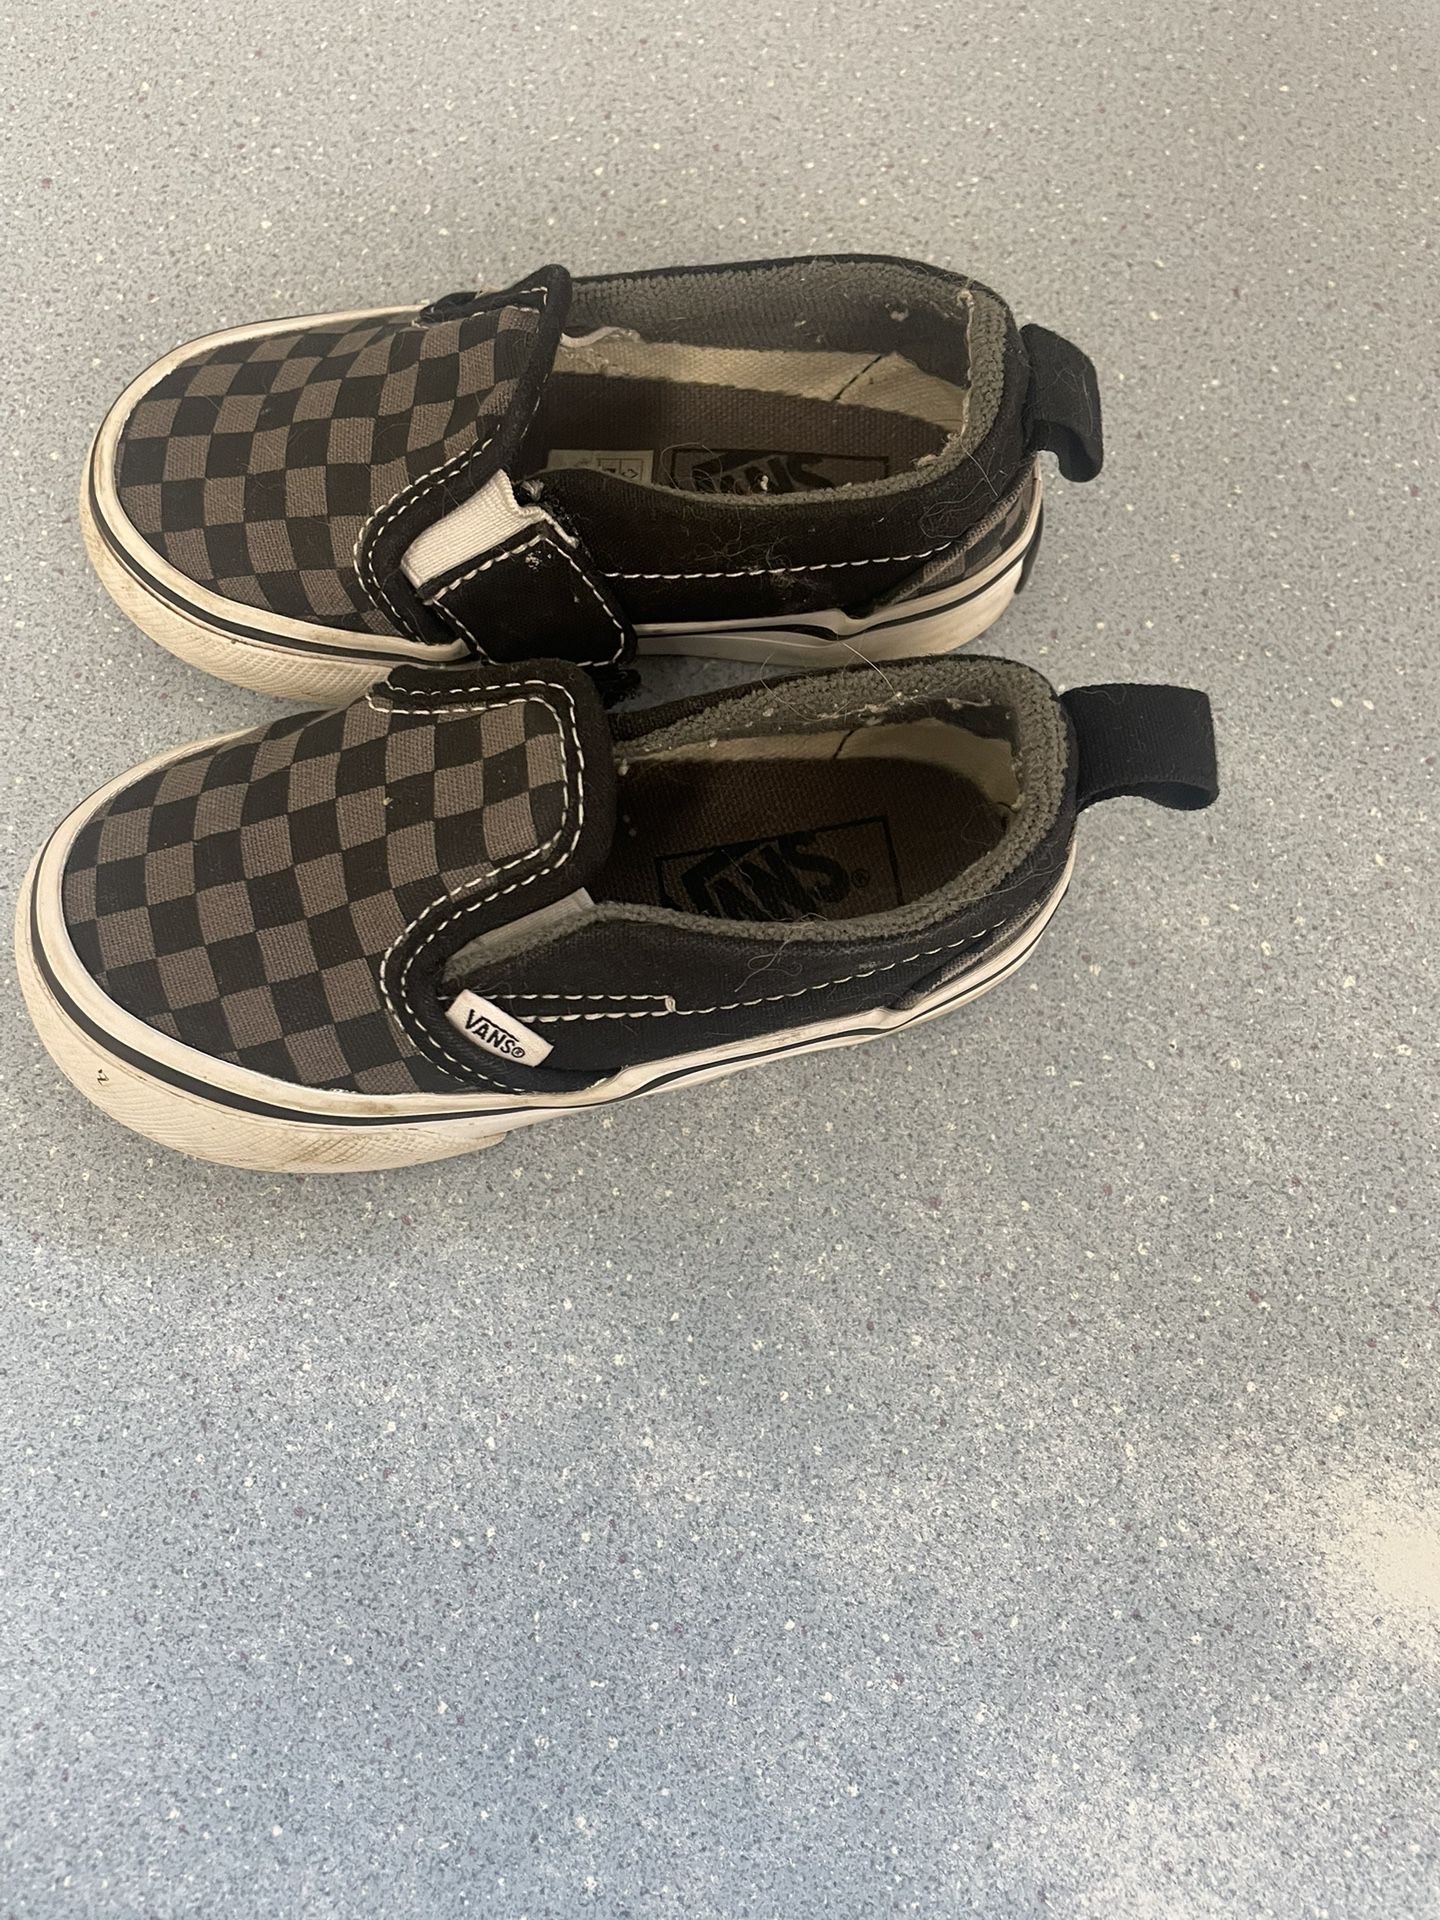 Toddlers Size 7 Vans Shoes 